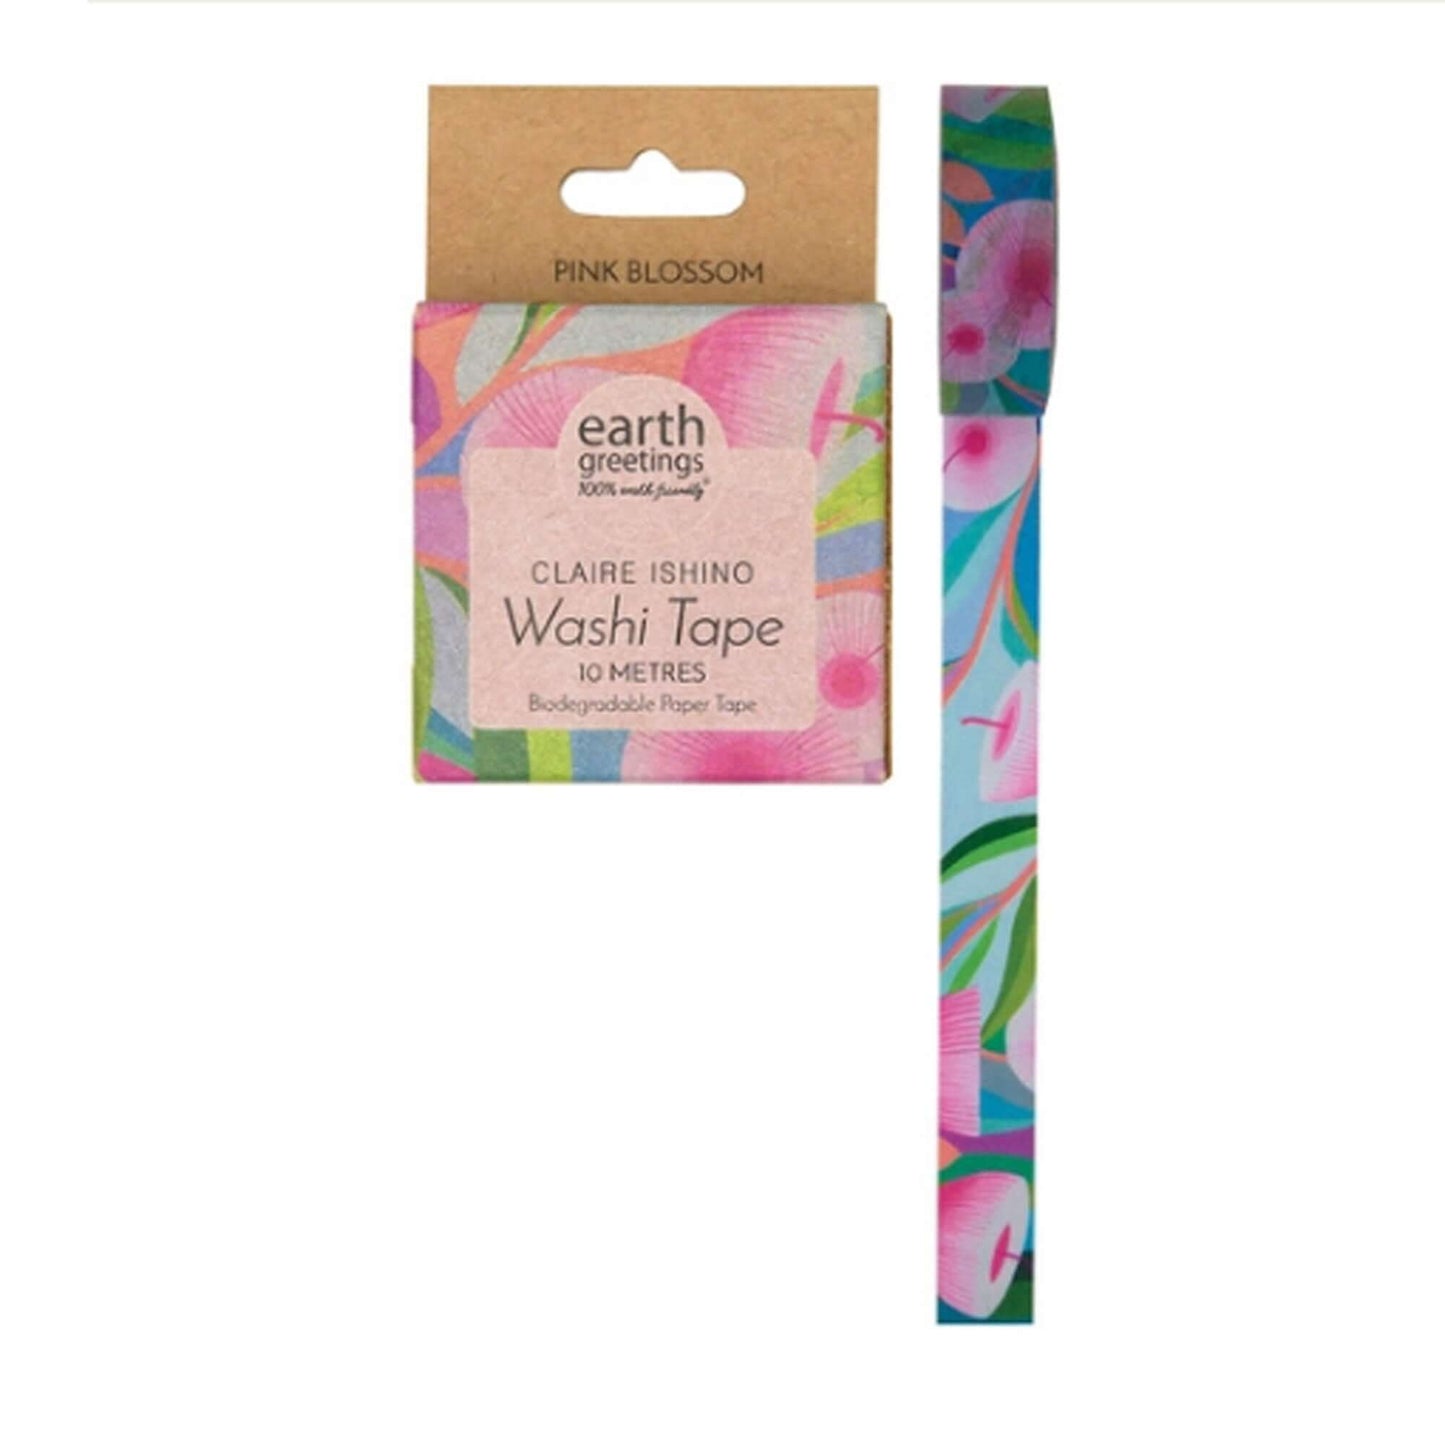 1 box of 100% earth friendly washi tape. Pink floral.